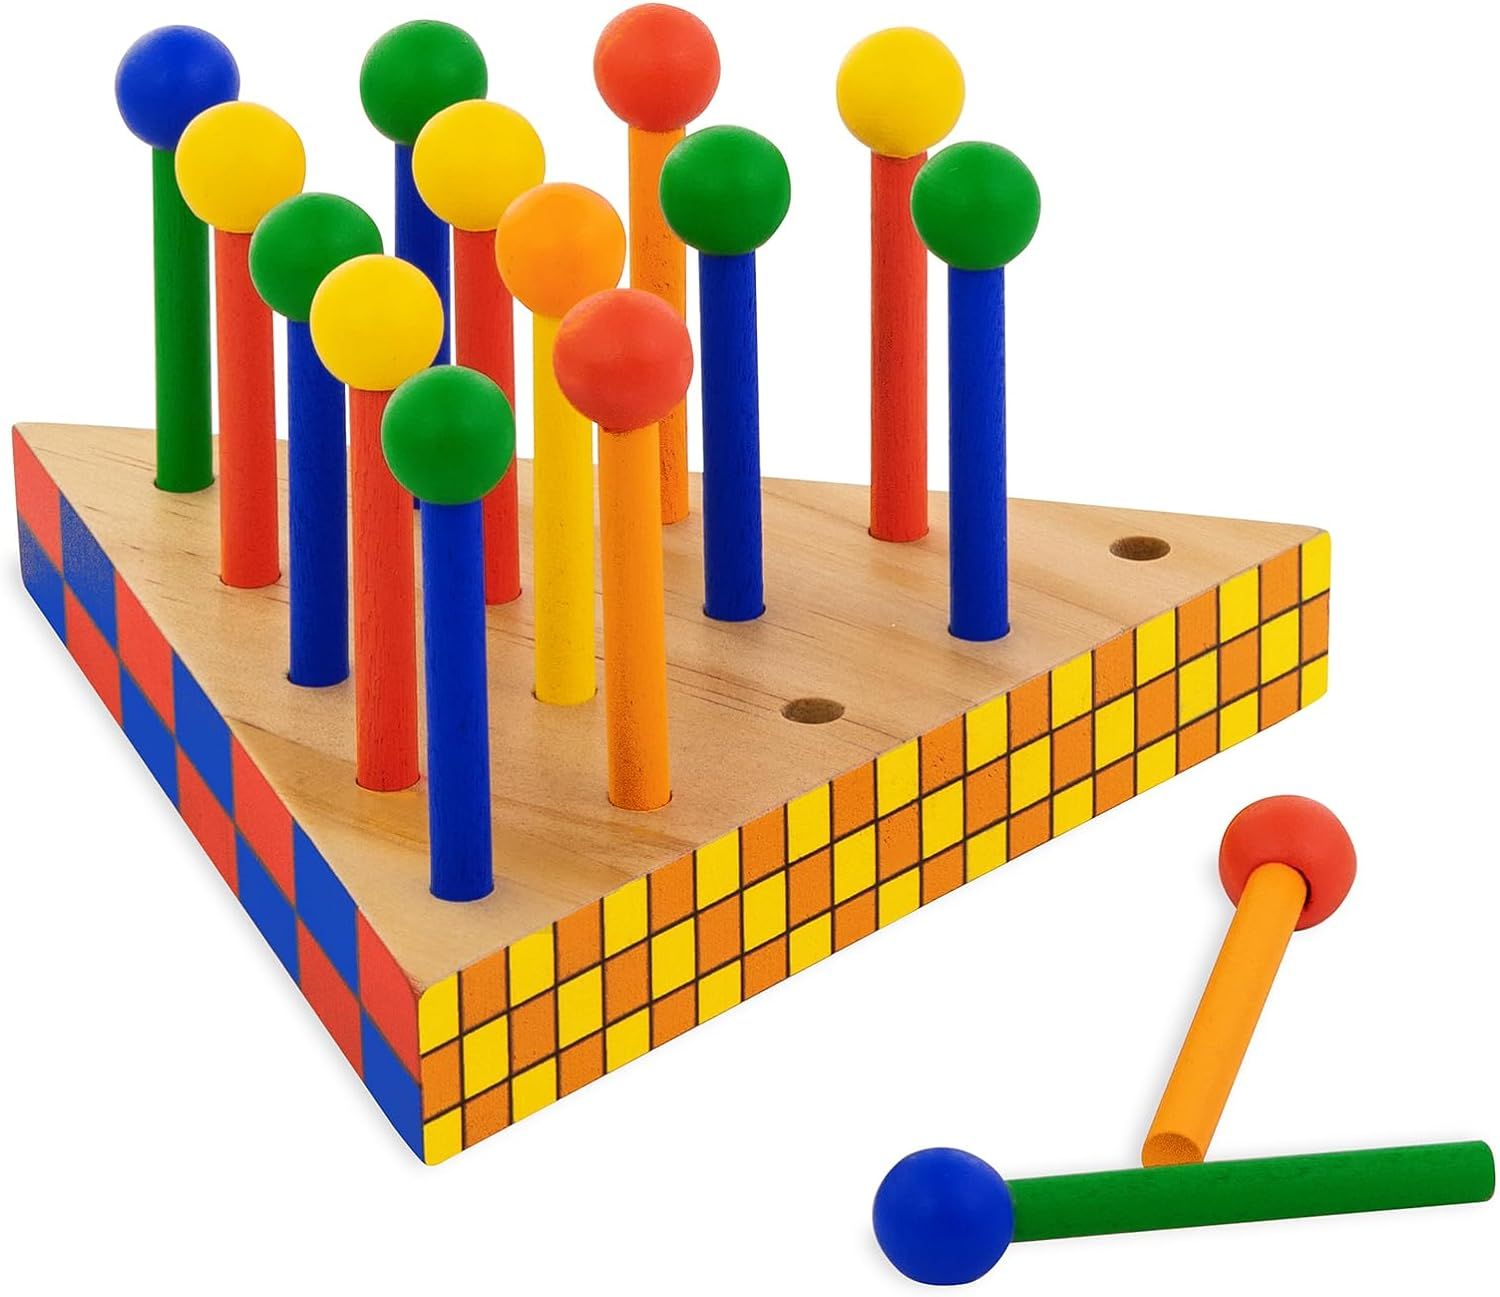 ban.do Triangle Peg Game, Wooden Peg Board with Plastic Game Pieces, Handheld Solitaire Game for ... | Amazon (US)